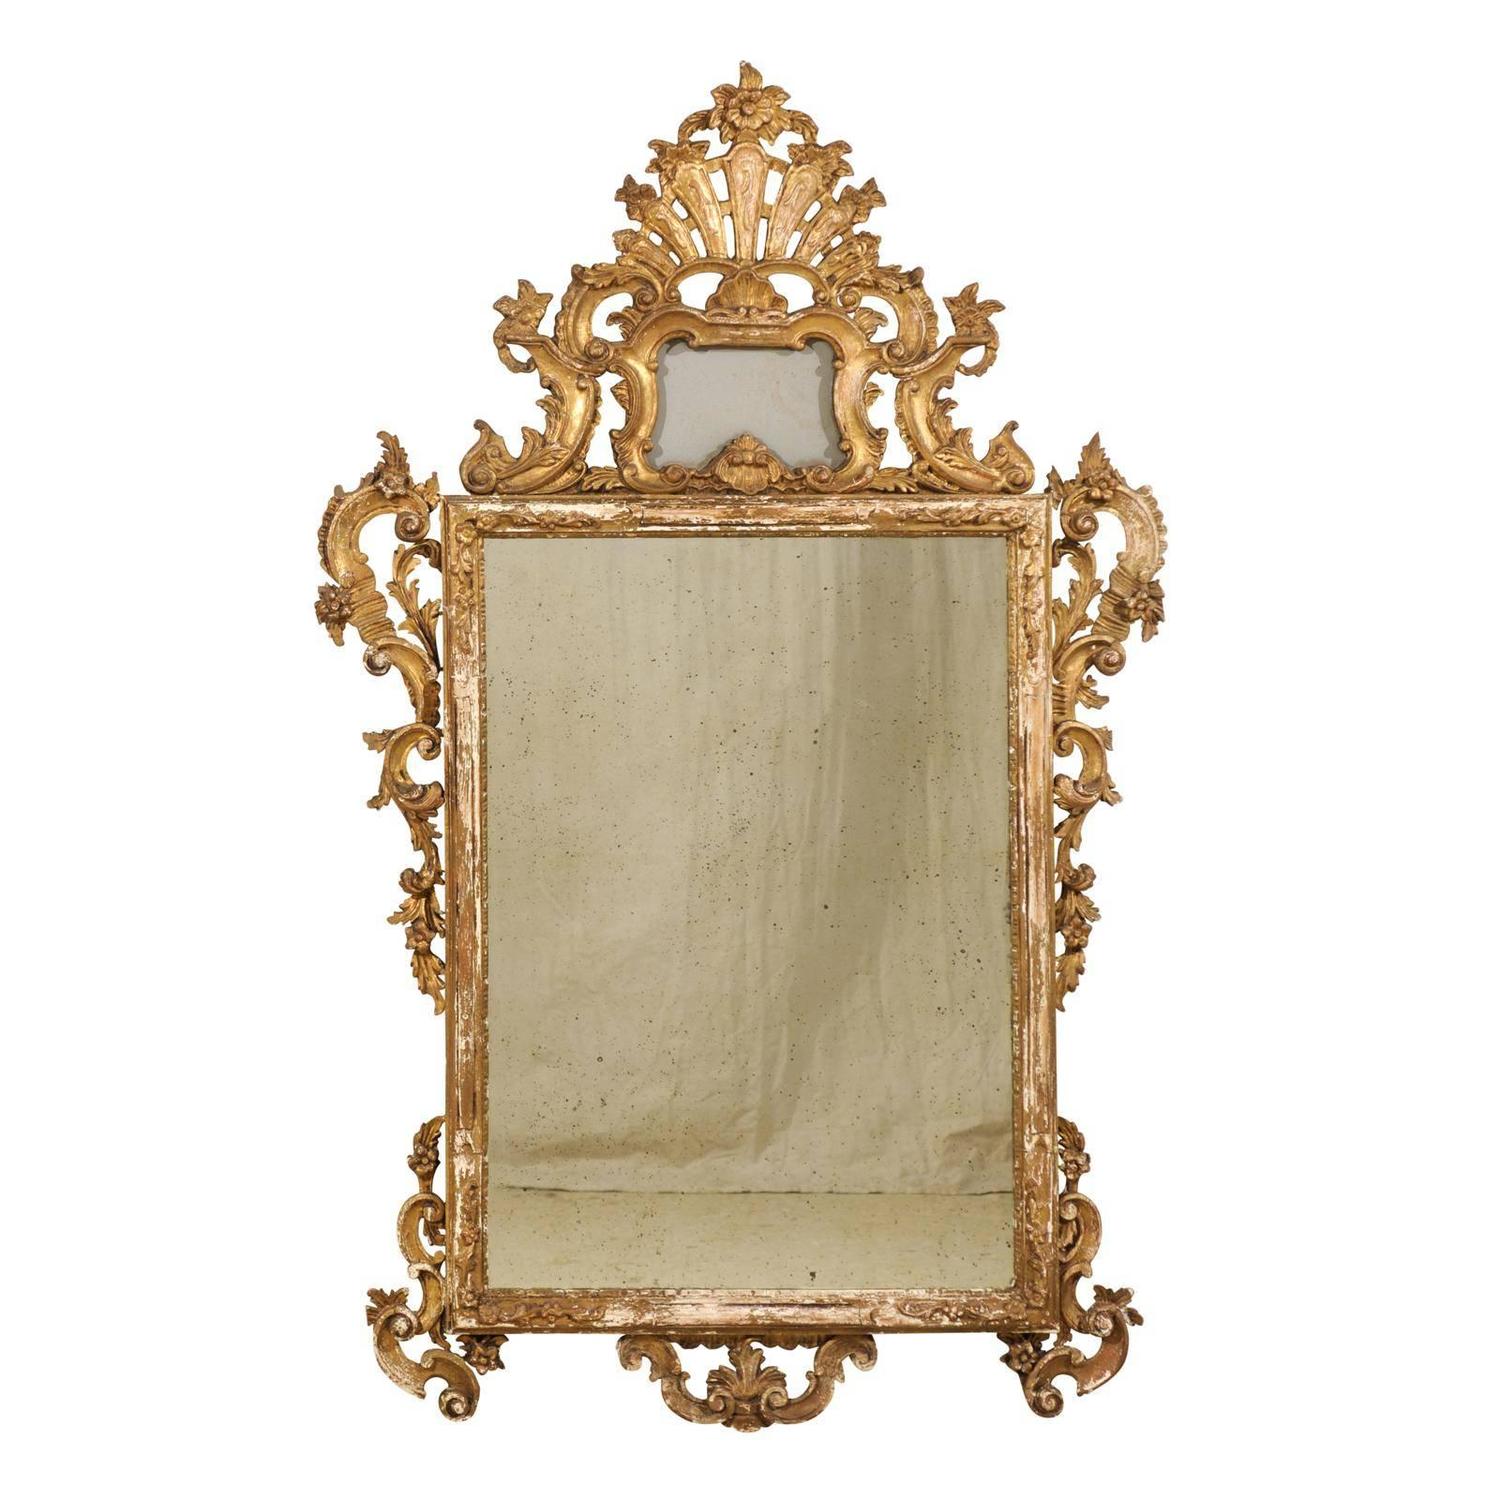 Italian 19th Century Rococo Style Mirror For Sale at 1stdibs